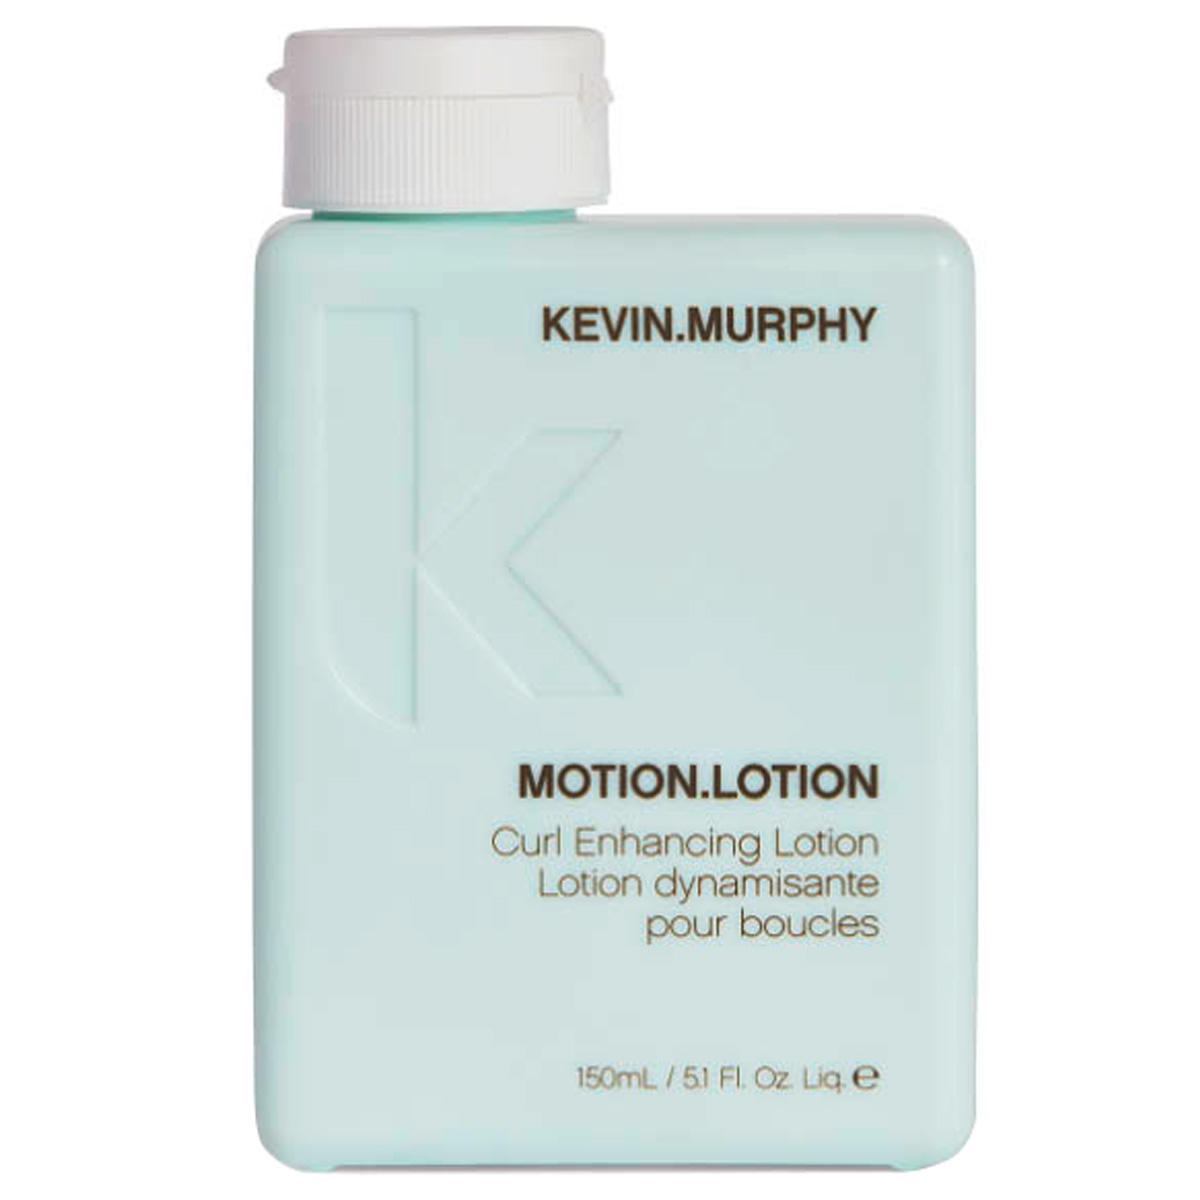 KEVIN.MURPHY MOTION.LOTION 150 ml - 1